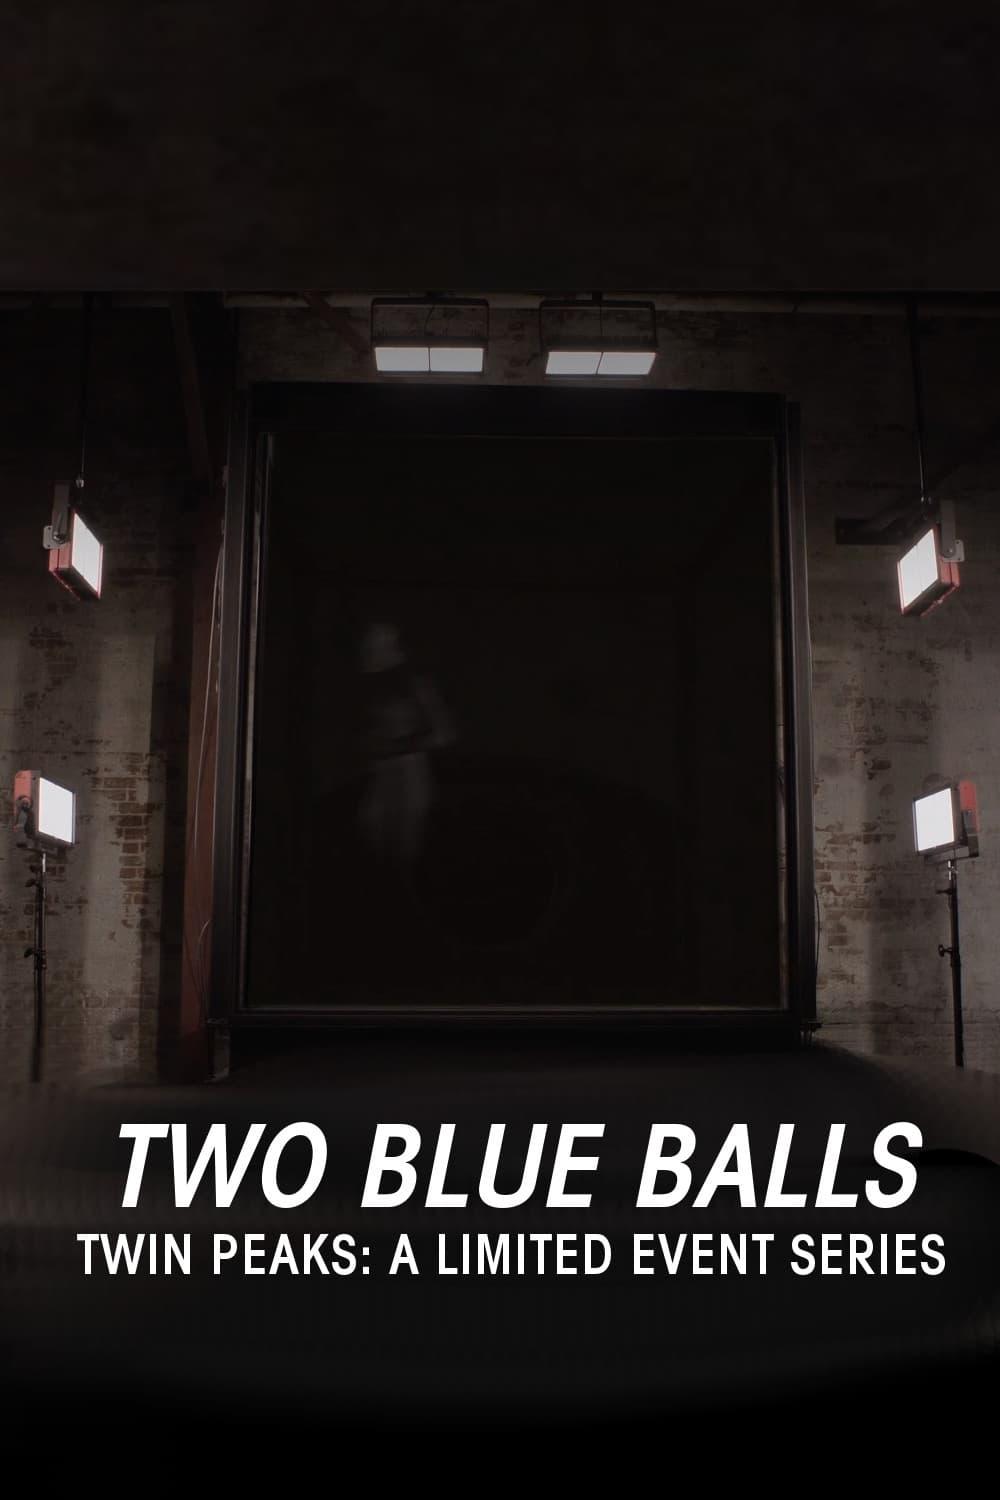 Two Blue Balls poster